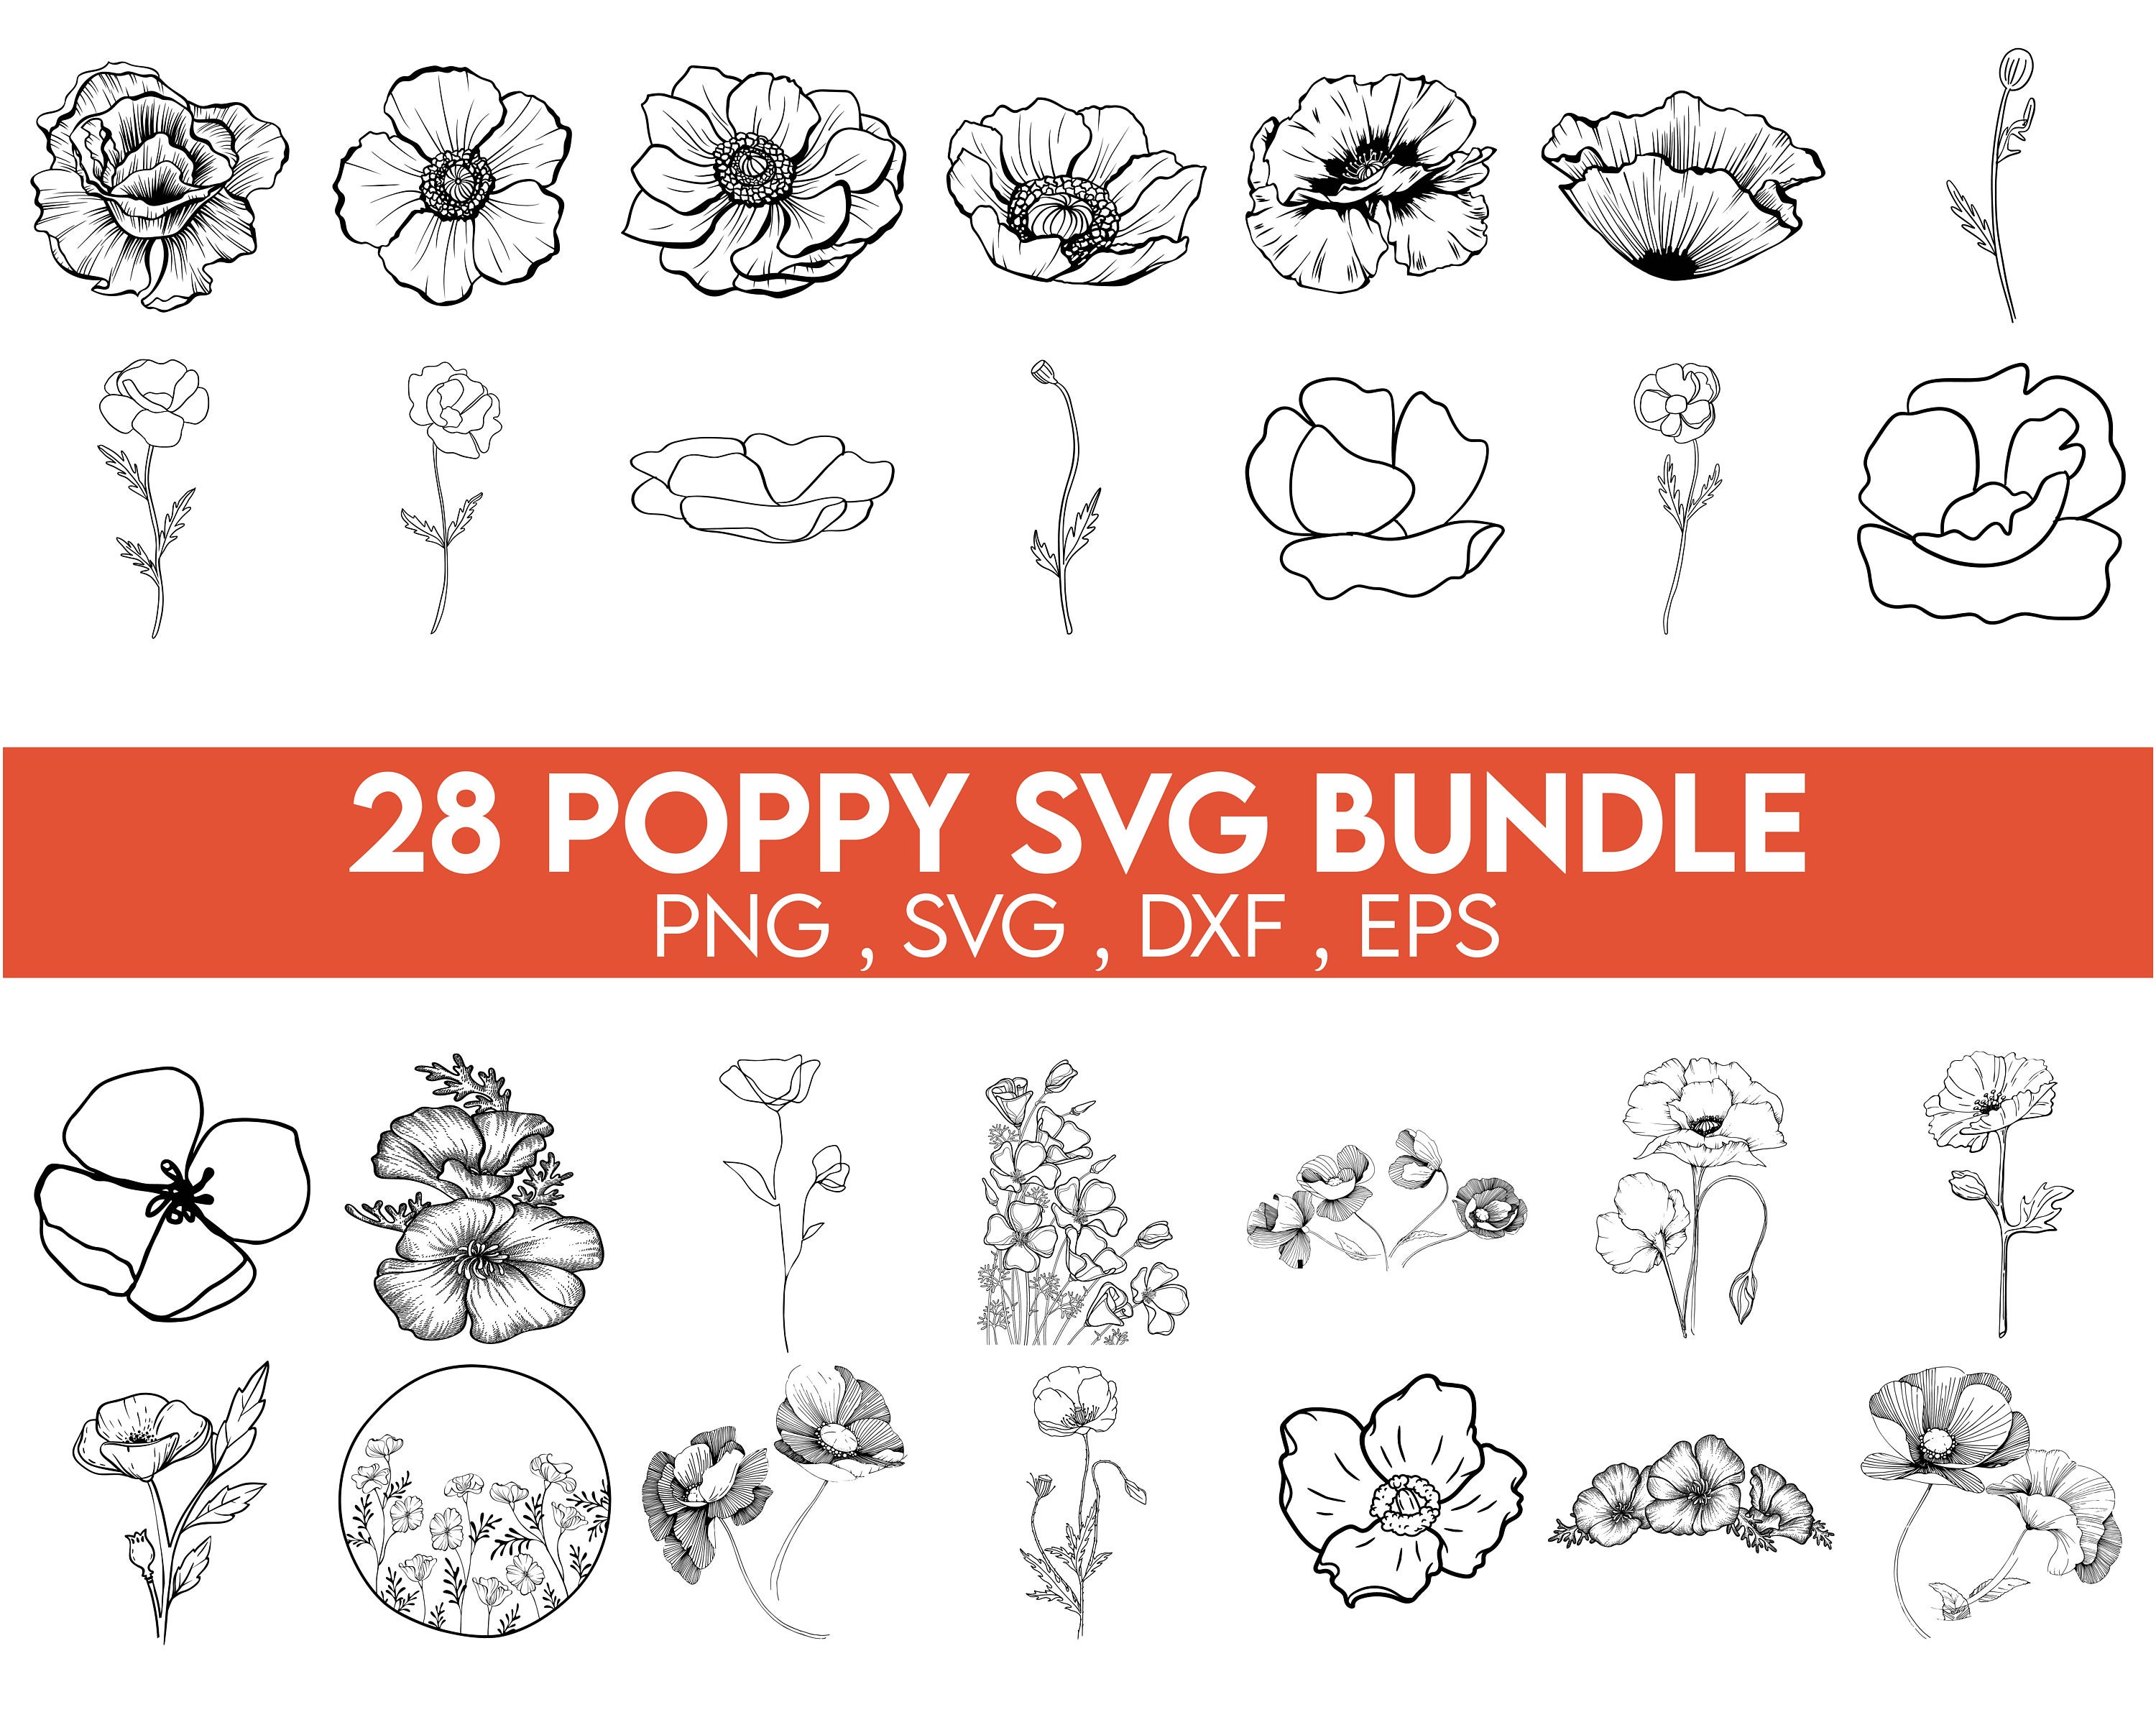 Mommy long legs bundle SVG, digital files for cricut silhouette PNG, JPG,  Dxf, decals, prints, sublimation pack poppy play time